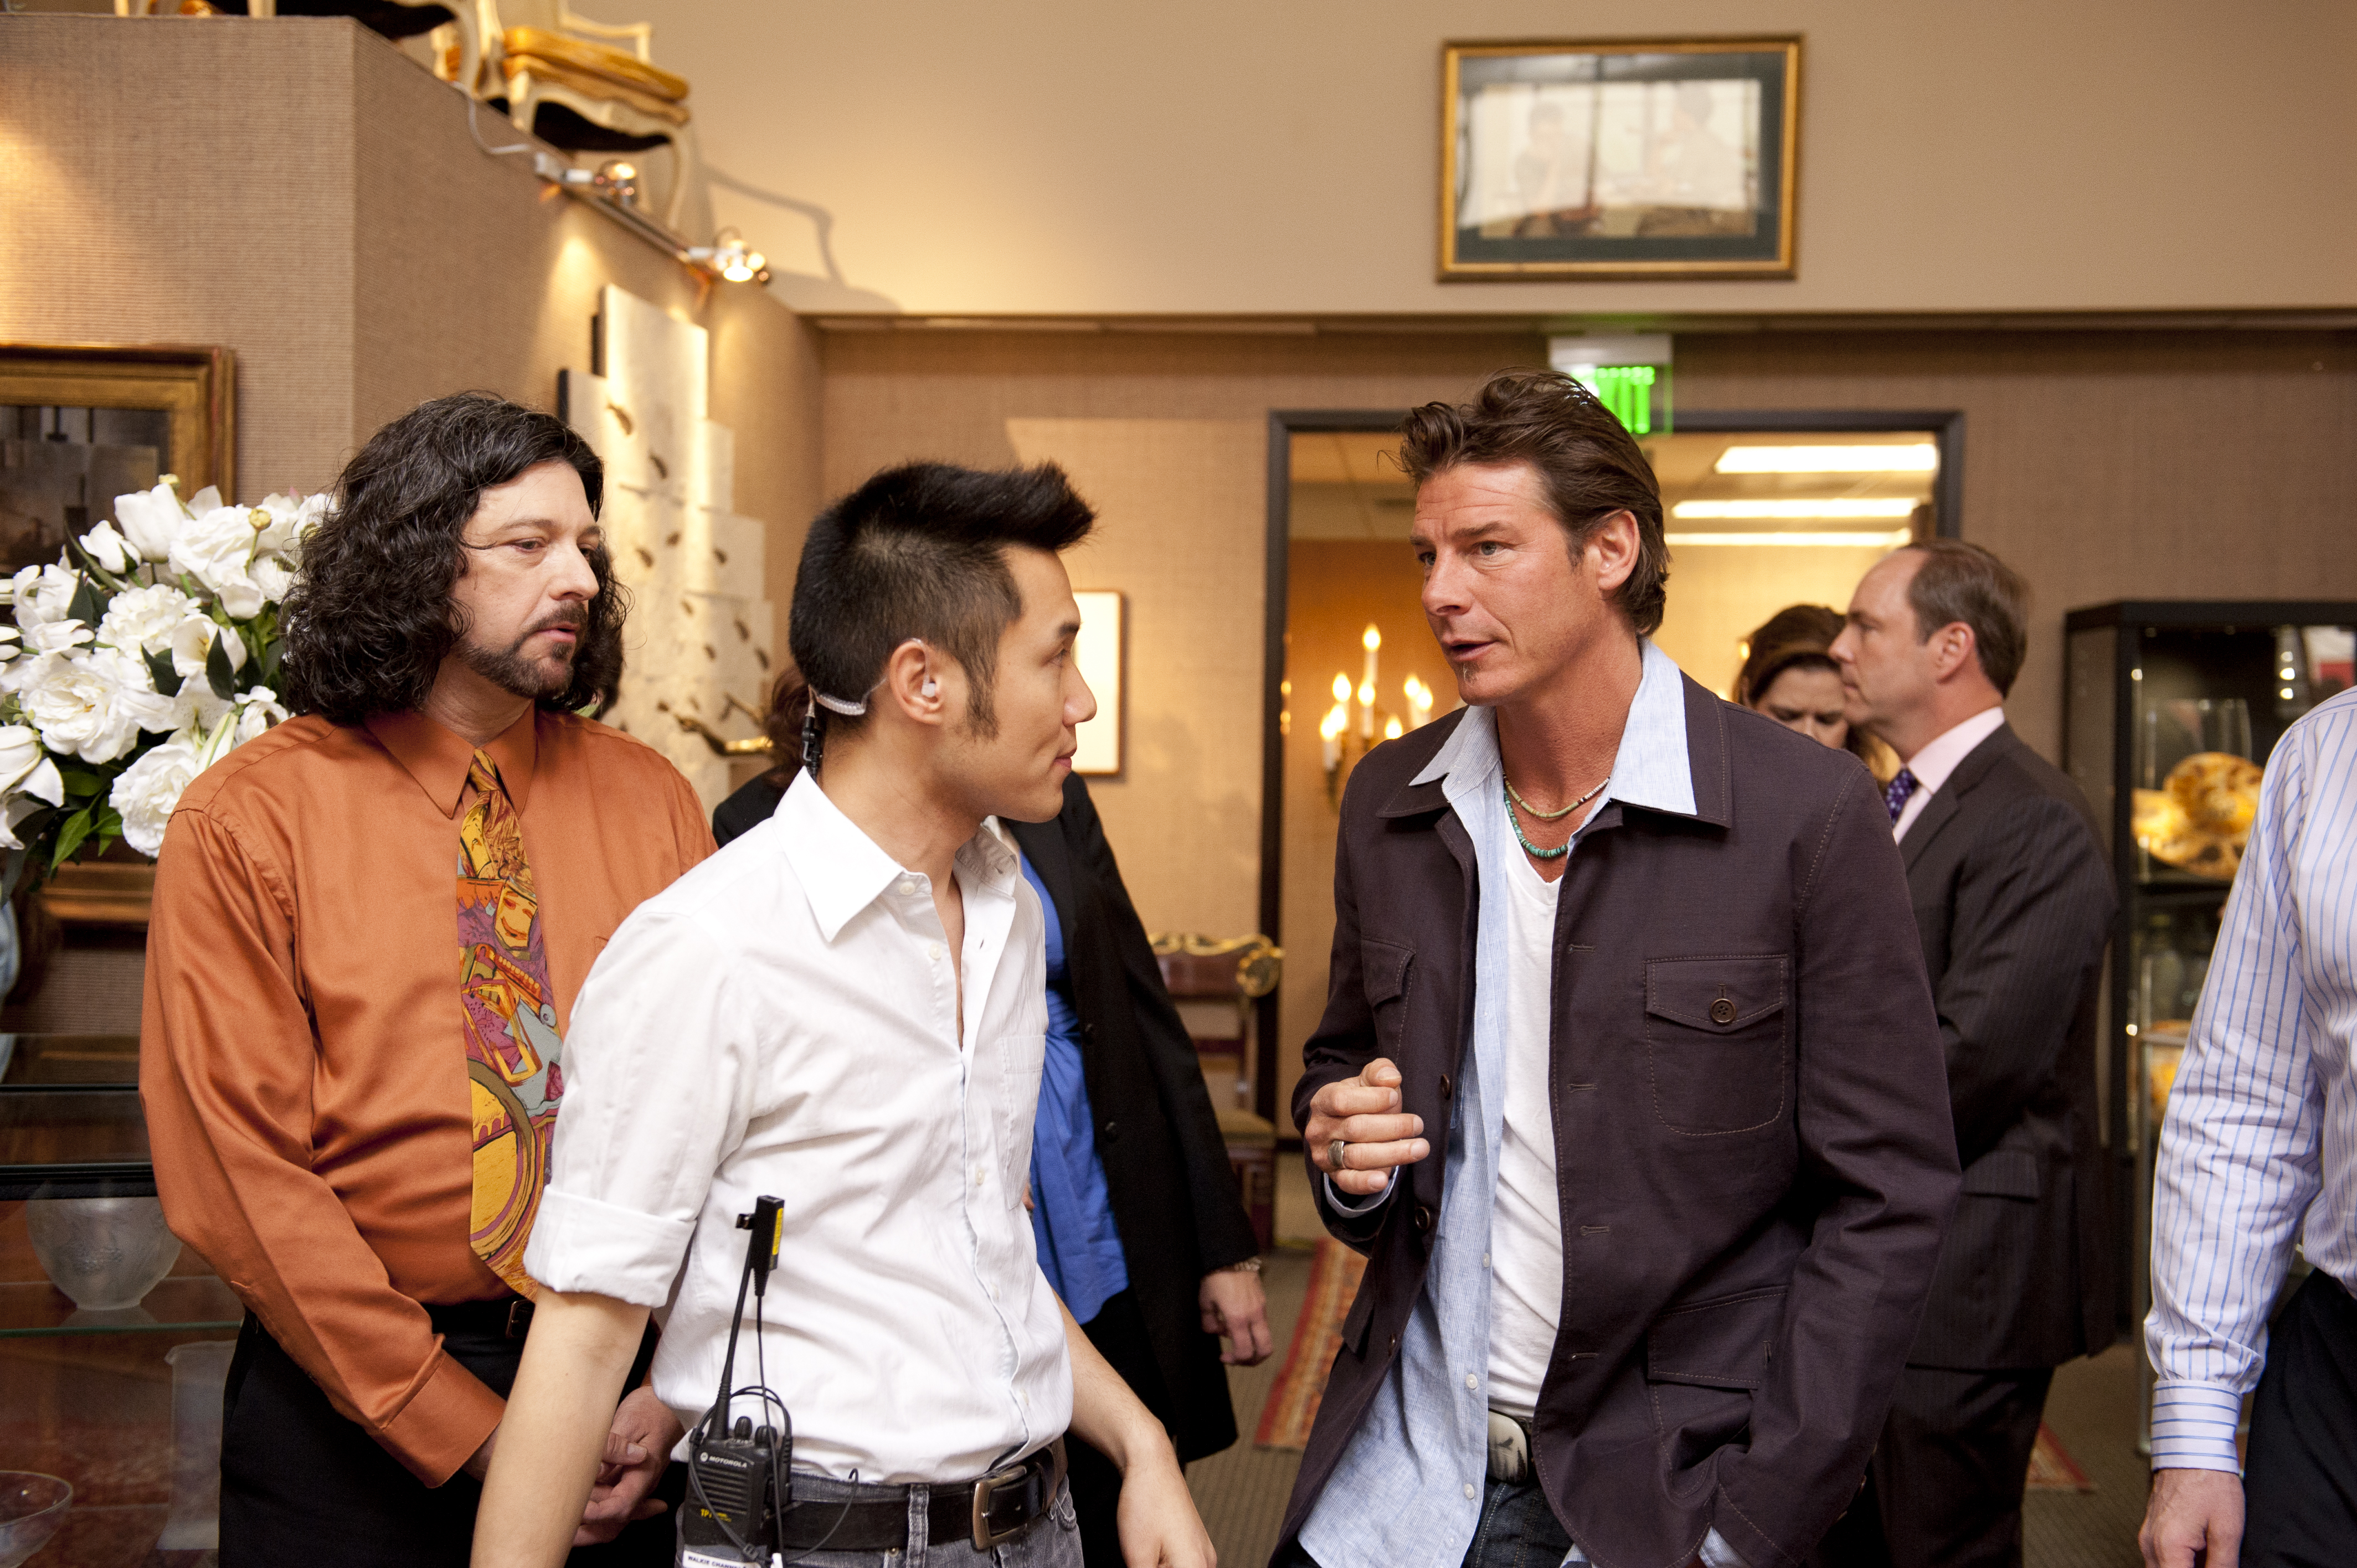 On the set of ABC's Great Big American Auction, with Ty Pennington.